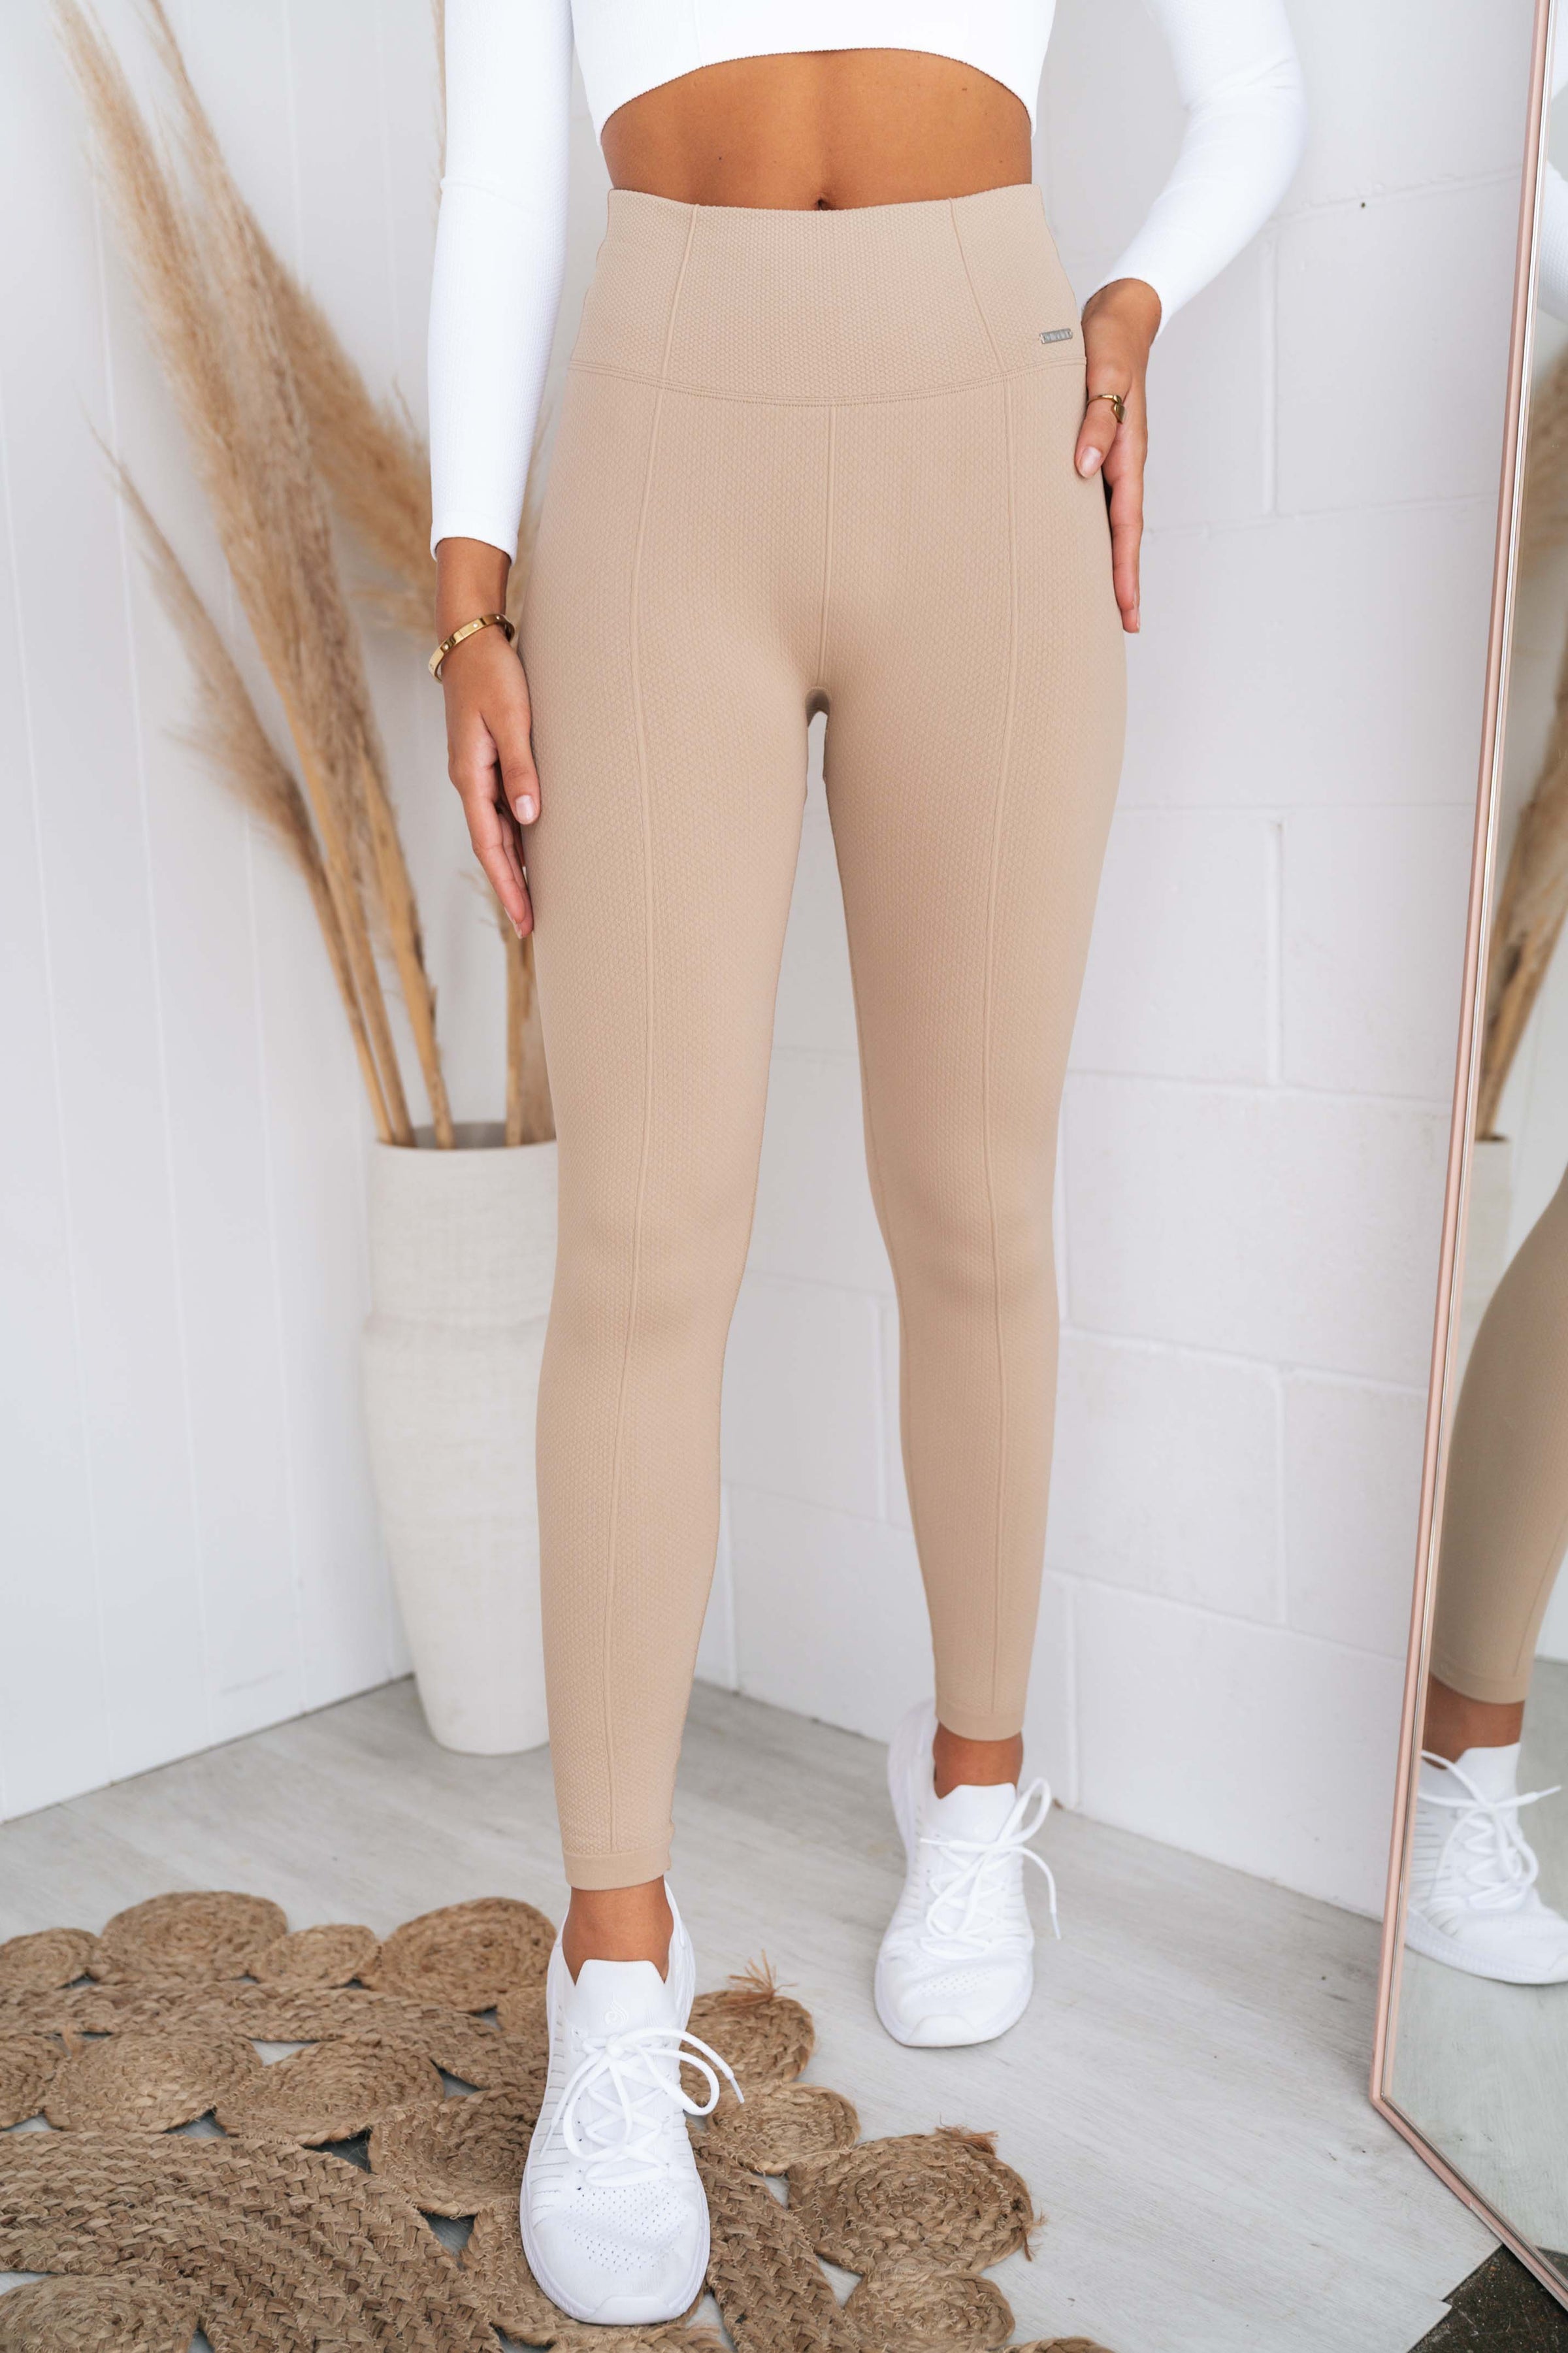 High Waist Nude The Yoga Luxe Short For Women Tight Elastic